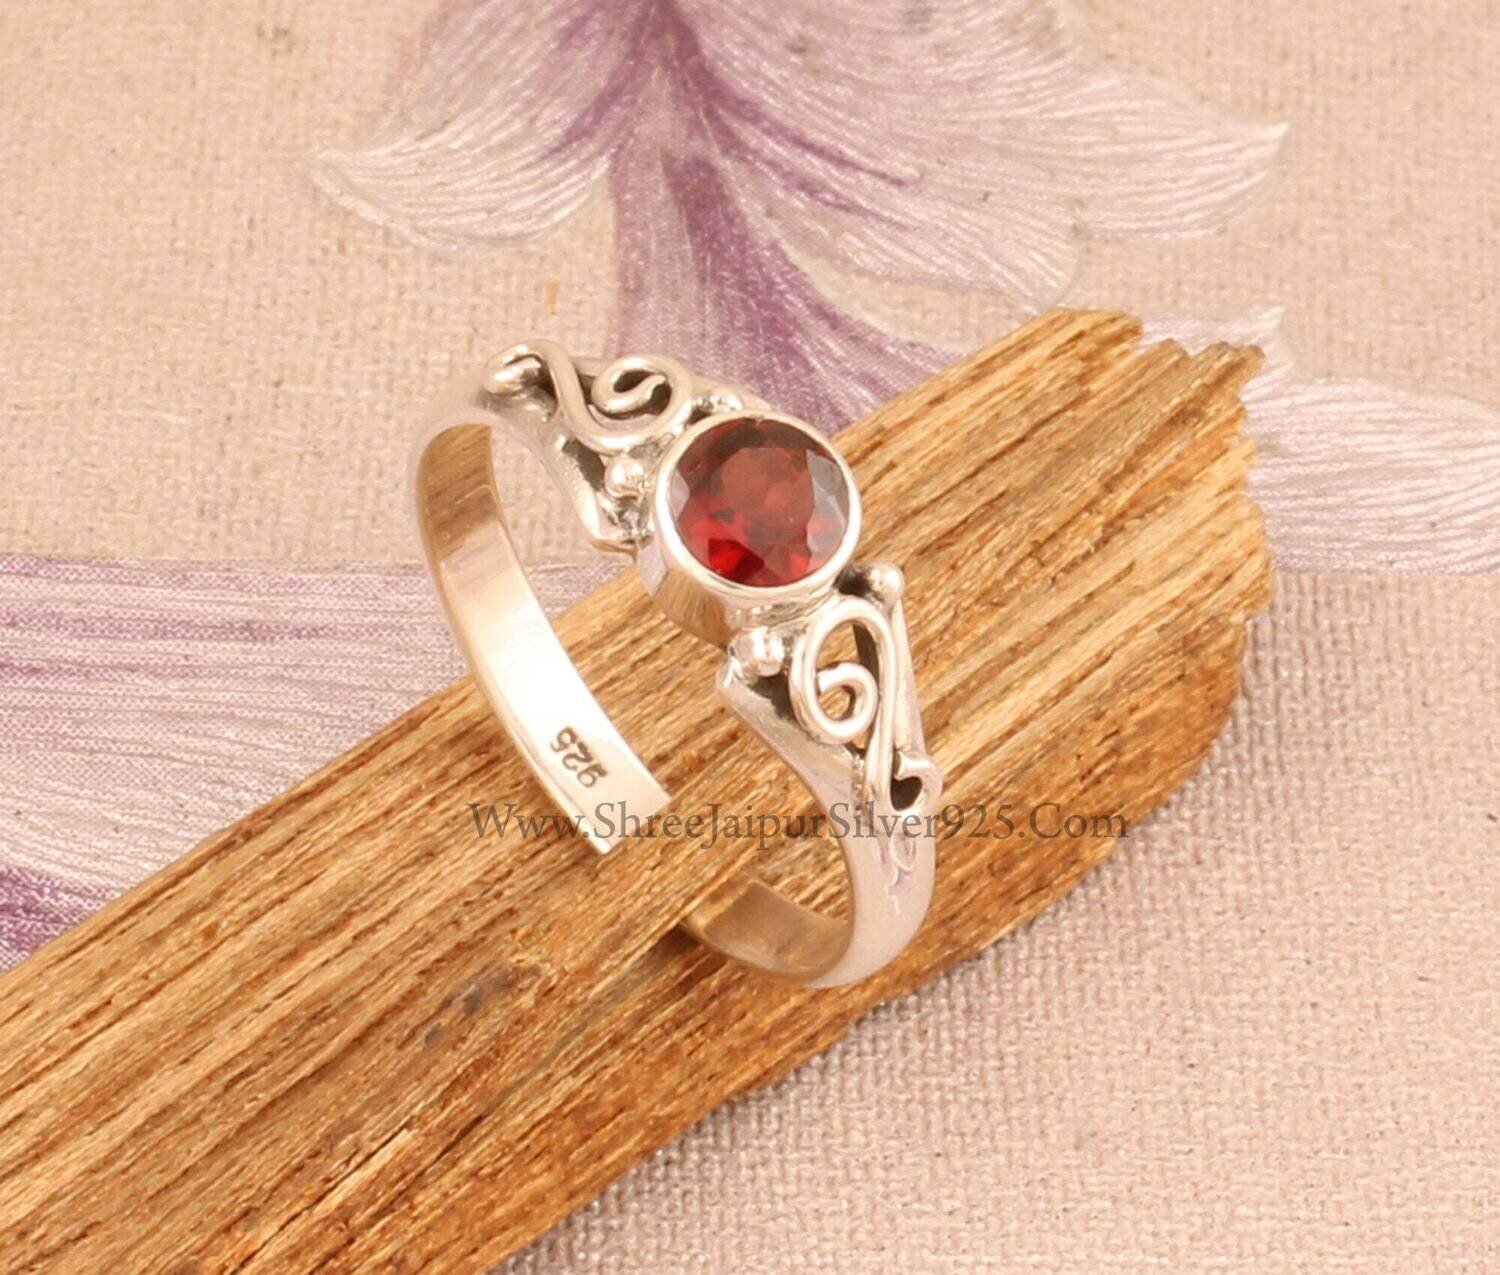 Round Cut Red Garnet Tiny Stone Solid 925 Sterling Silver Ring For Women, Handmade Dainty Vintage Design Ring For Wedding Anniversary Gift